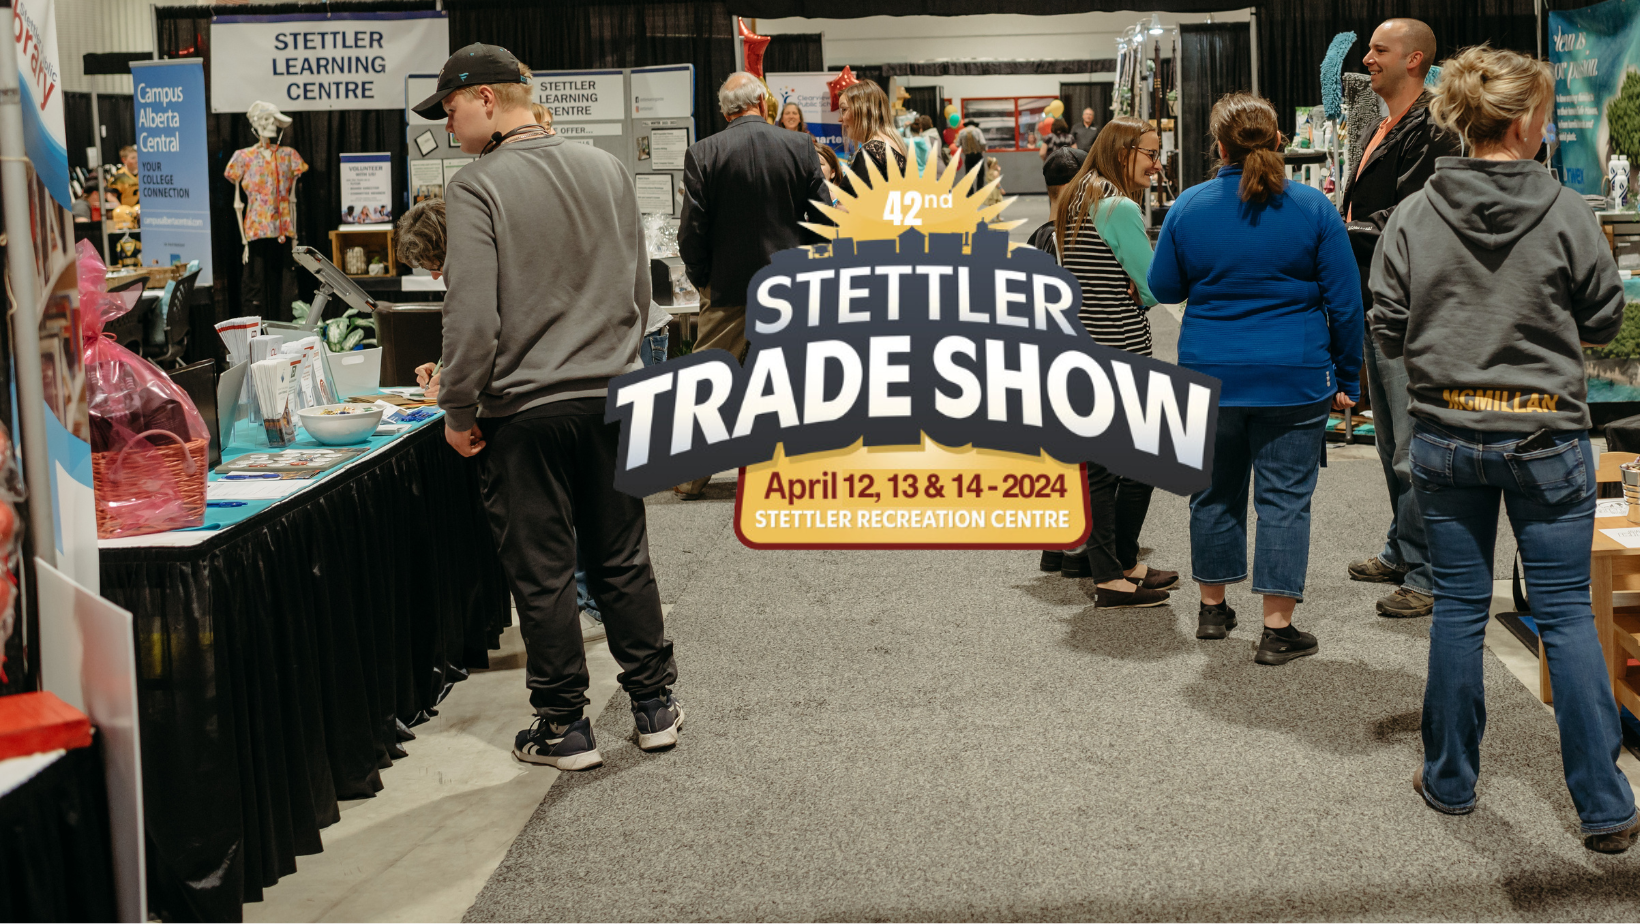 ​For over 40 years, the Stettler Trade Show has offered one stop shopping with family fun for a reasonable price and allows vendors to showcase their products and services to a variety of potential customers.  And we aren't stopping now. Each year the show continues to grow in one way or another making it bigger and better, and there's still more to come! Stop on in and see for yourself why Stettler's Trade Show is one of the best in Central Alberta!